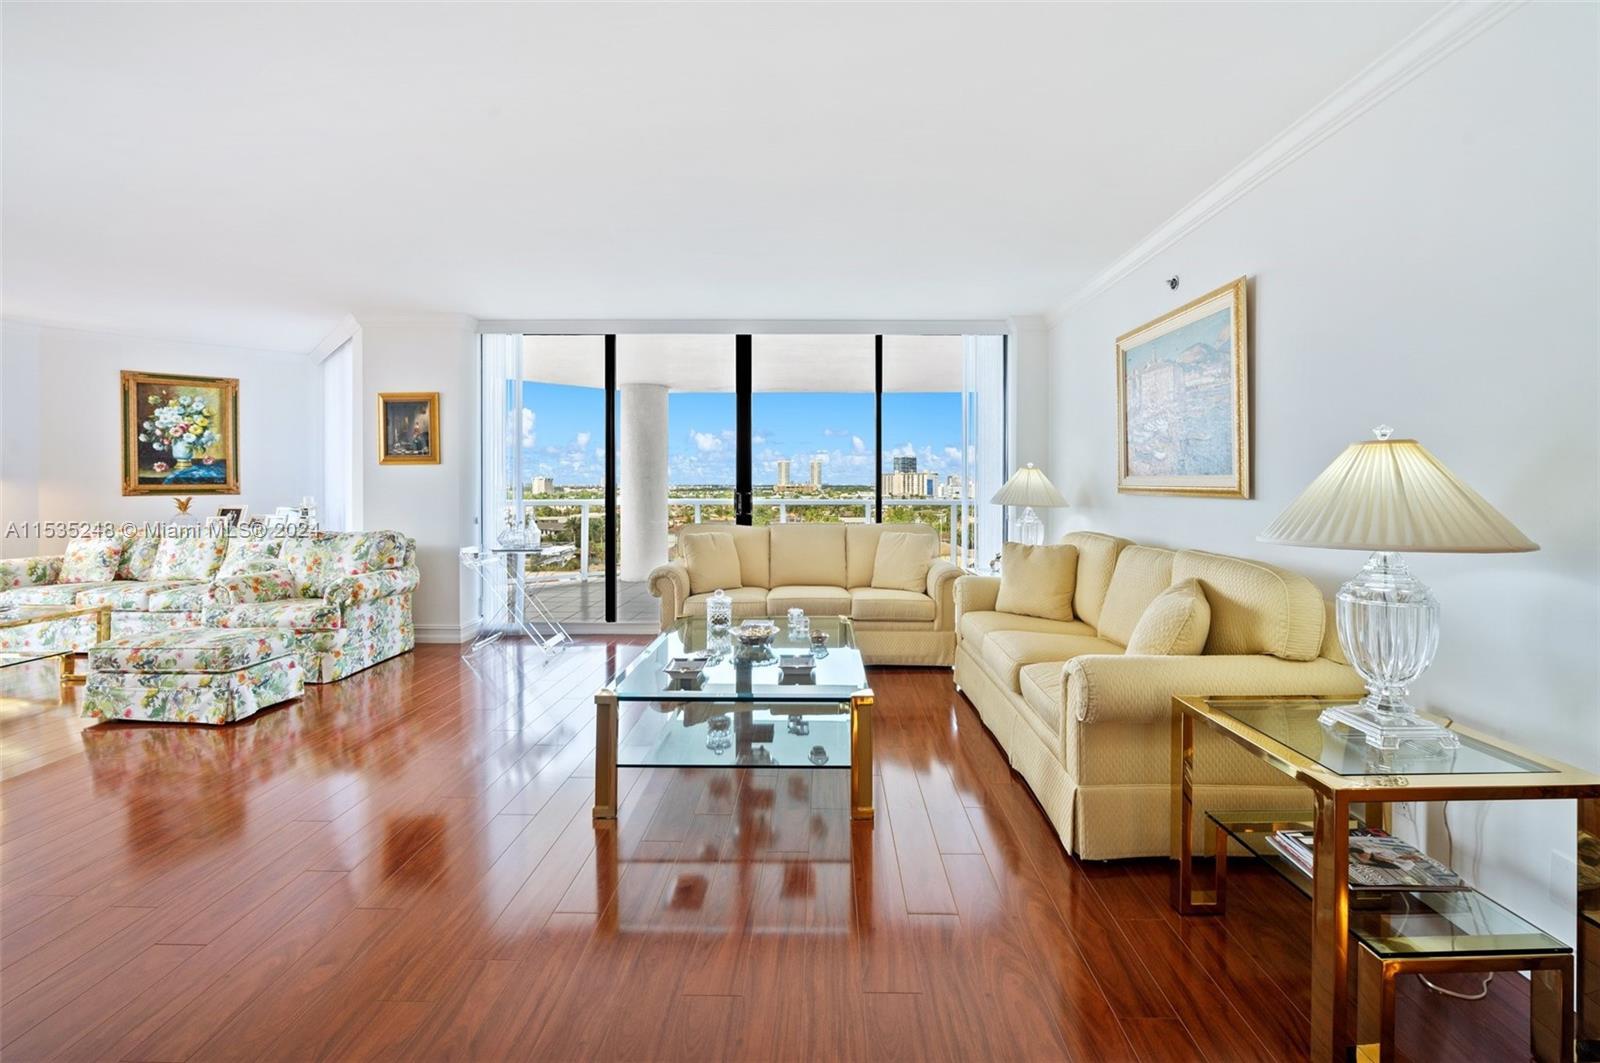 Completely remodeled, 3 bedroom corner unit with beautiful ocean, intracoastal and city views.  New 